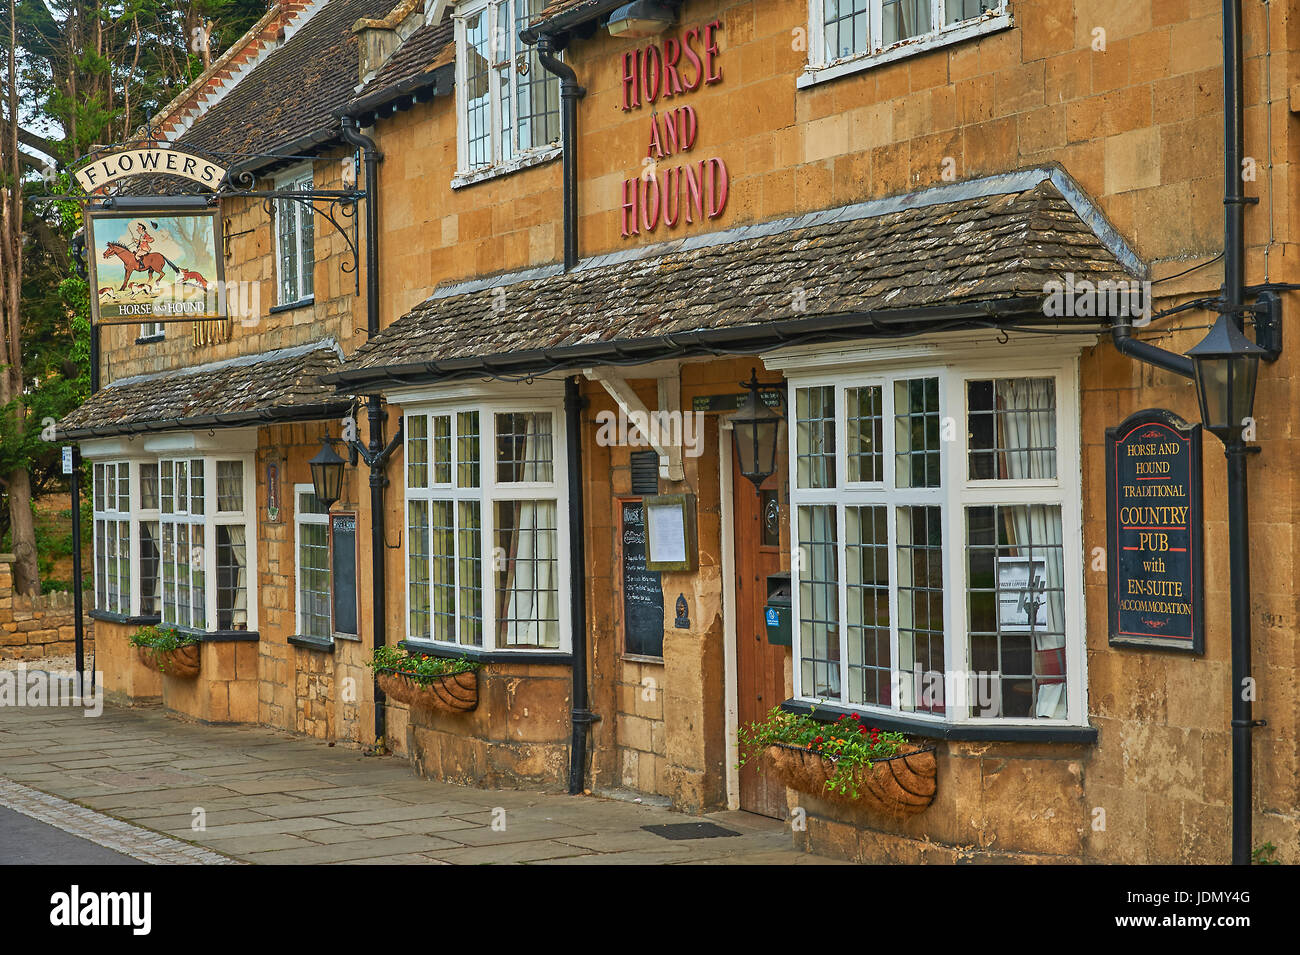 Horse and Hound public house in the Cotswold town of Broadway, with an old pub sign advertising Flowers Ales Stock Photo